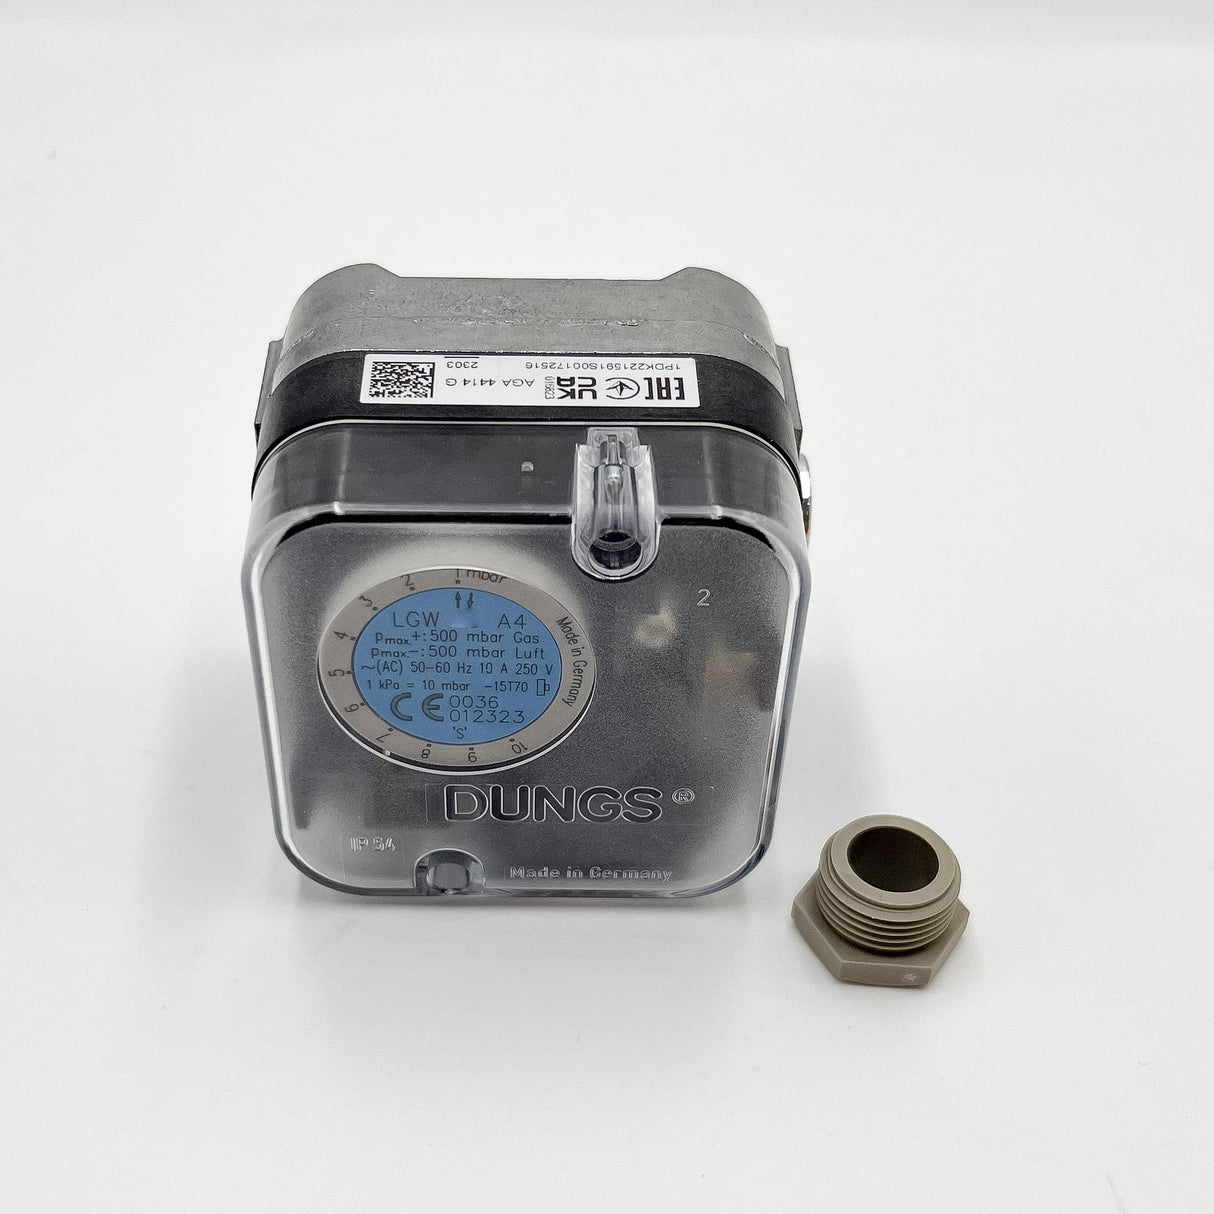 Dungs LGW150 A4 30-150 mbar Differential Air Pressure Switch